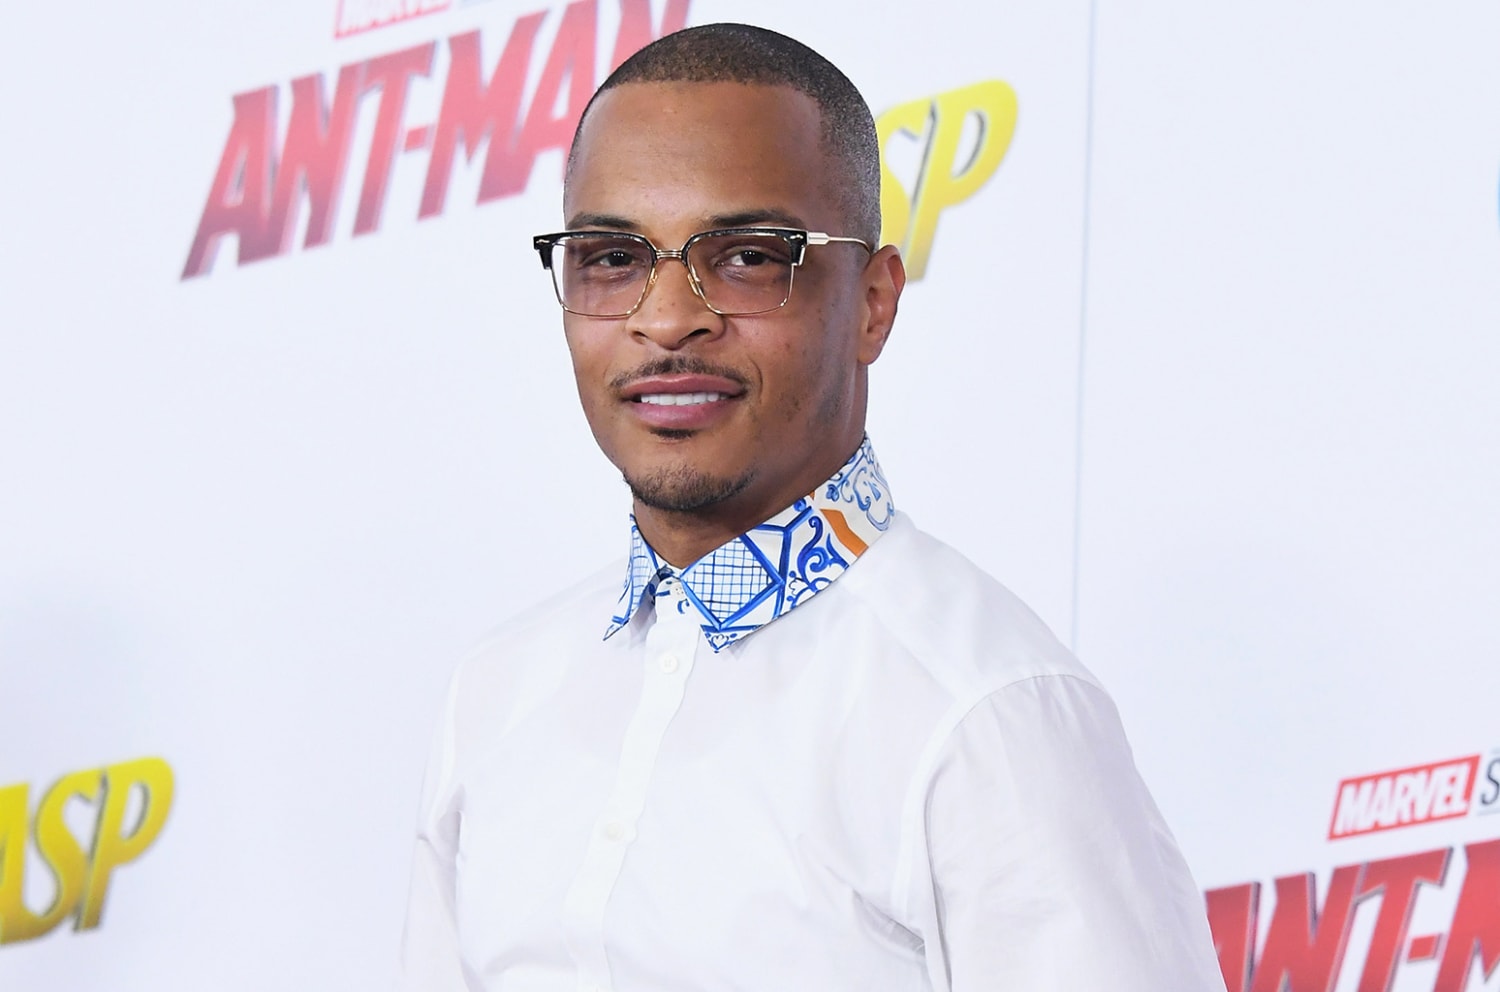 T.I. Settles Disorderly Conduct Case Against Security Guard With $300 Fine